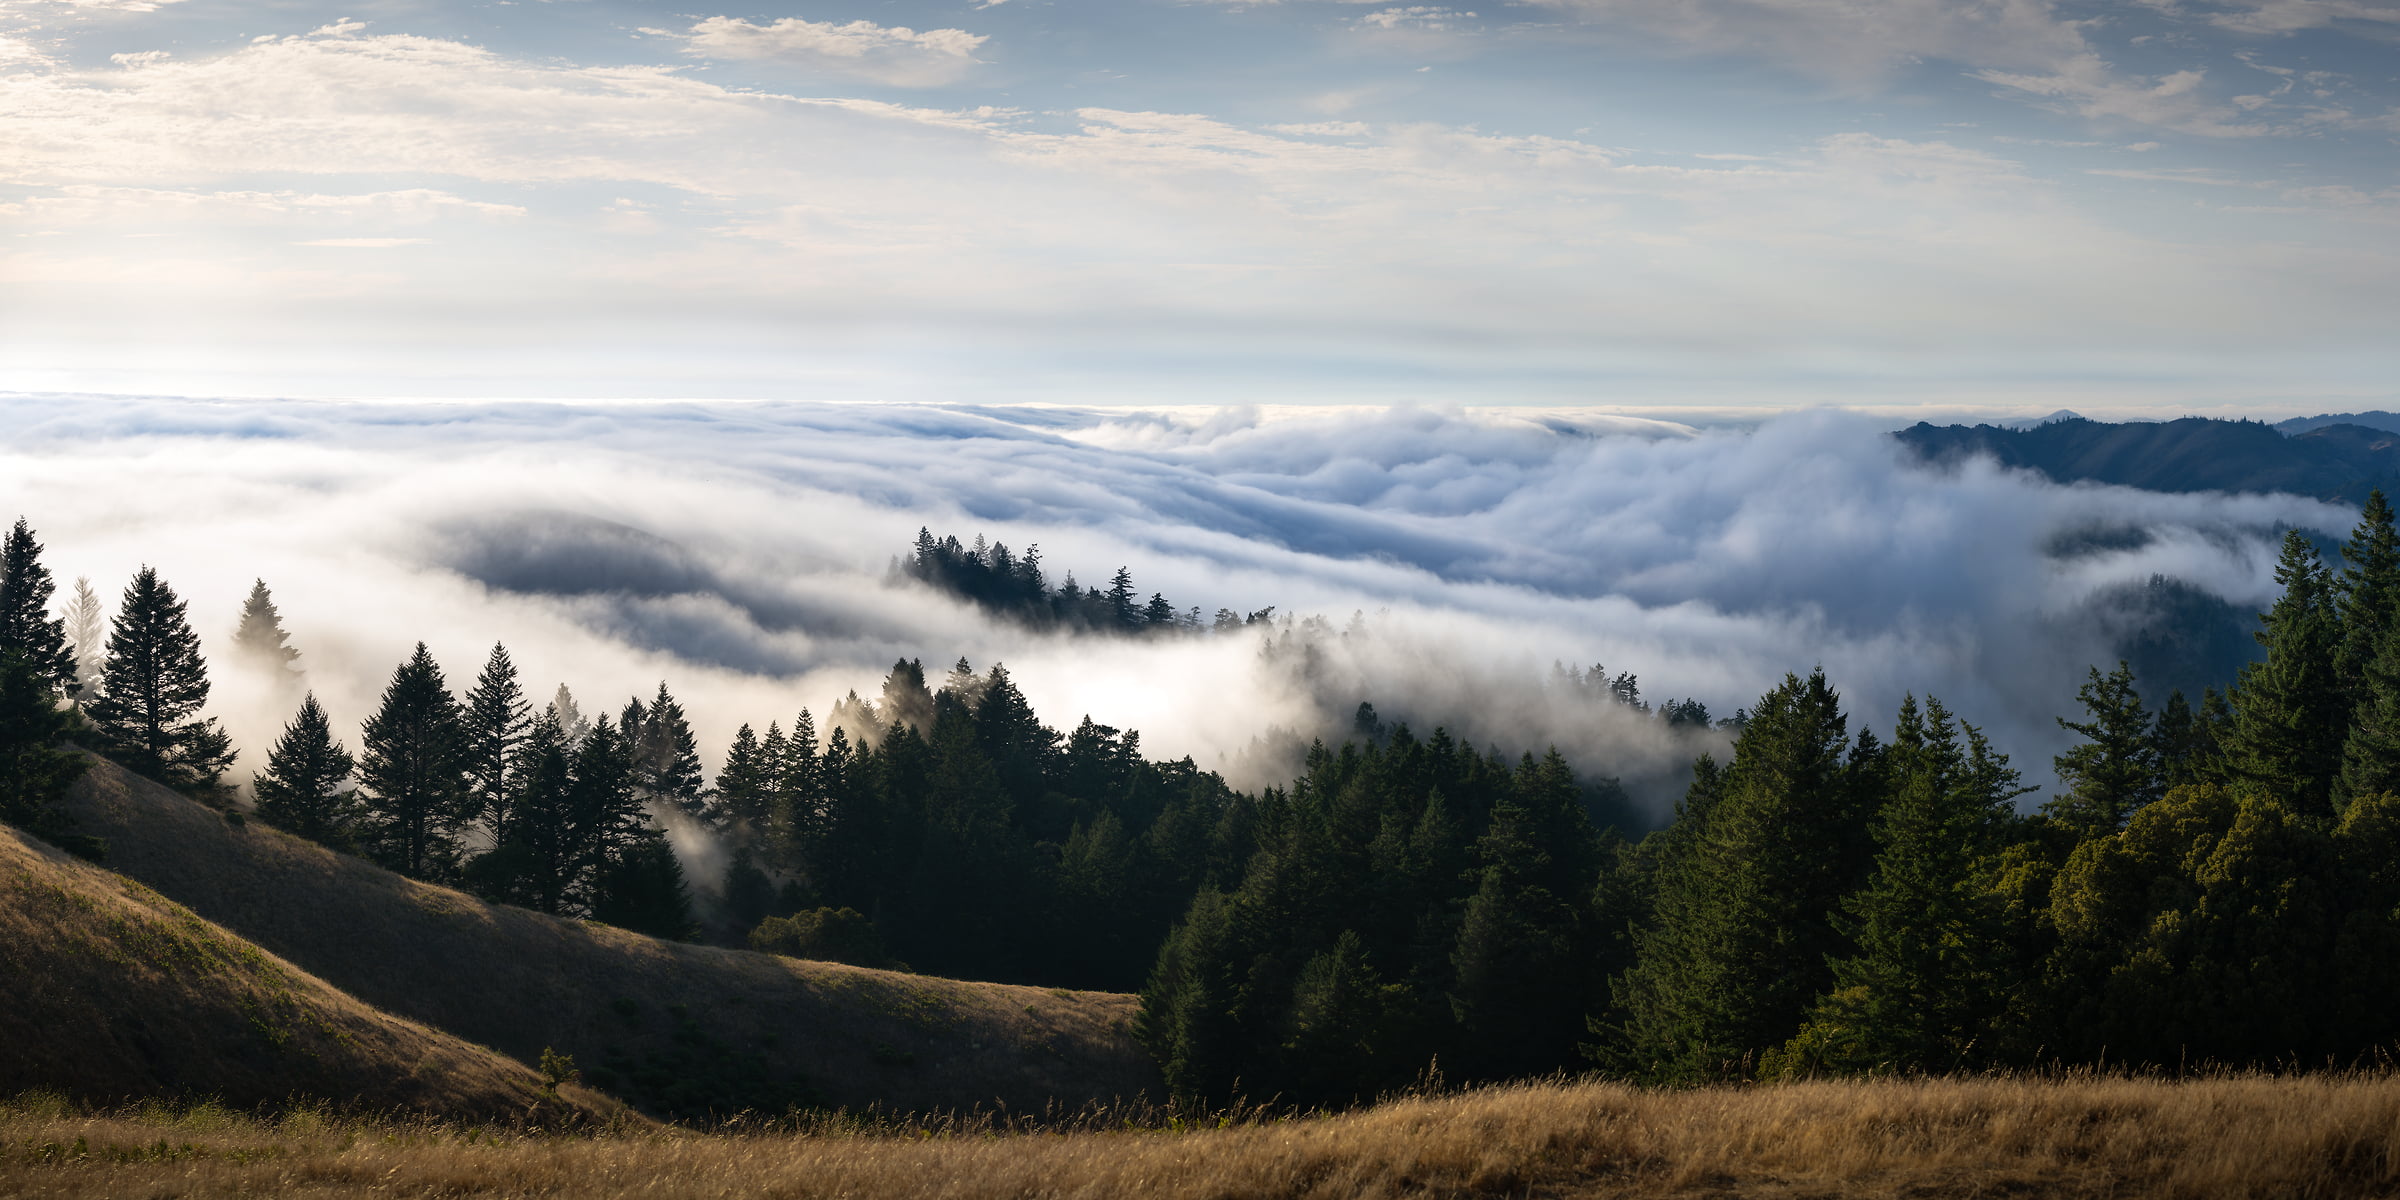 374 megapixels! A very high resolution, large-format VAST photo print of fog on a hillside amid trees; landscape photograph created by Jeff Lewis in Mt. Tamalpais, California.